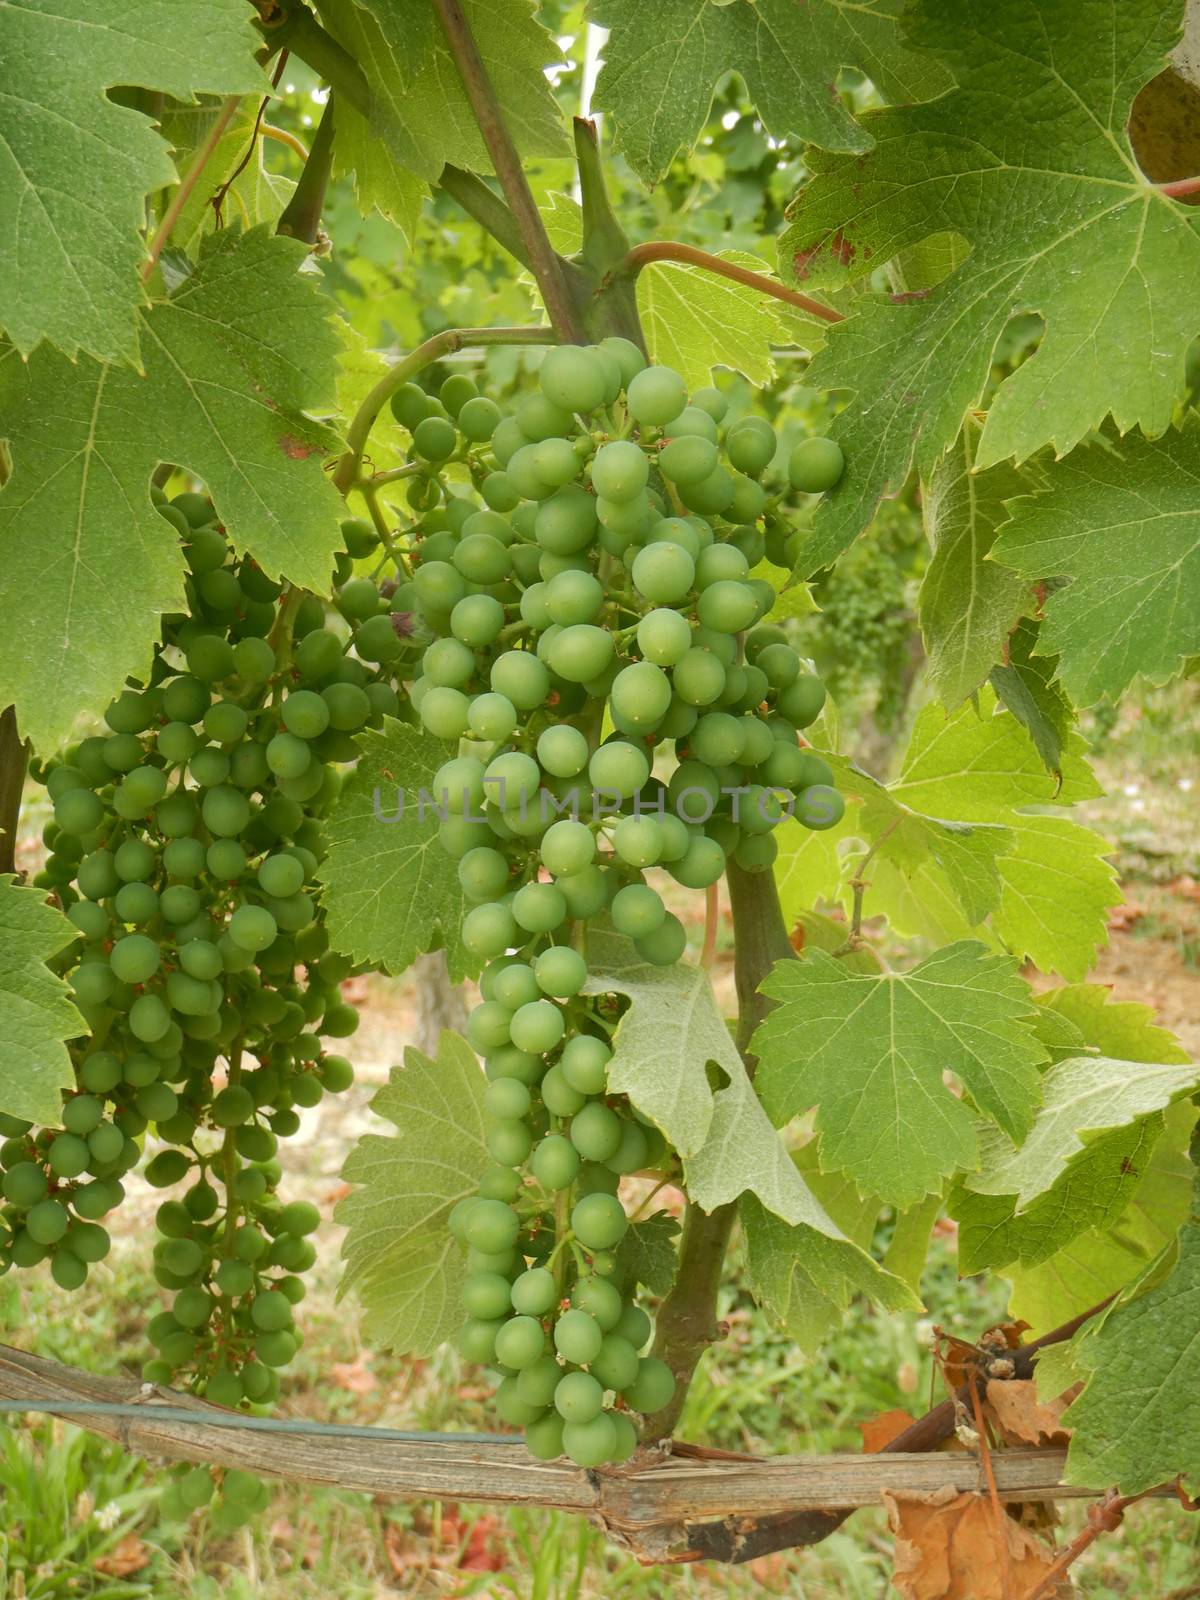 Bunches of grapes still unripe in a vineyard in the Langhe, Piedmont - Italy